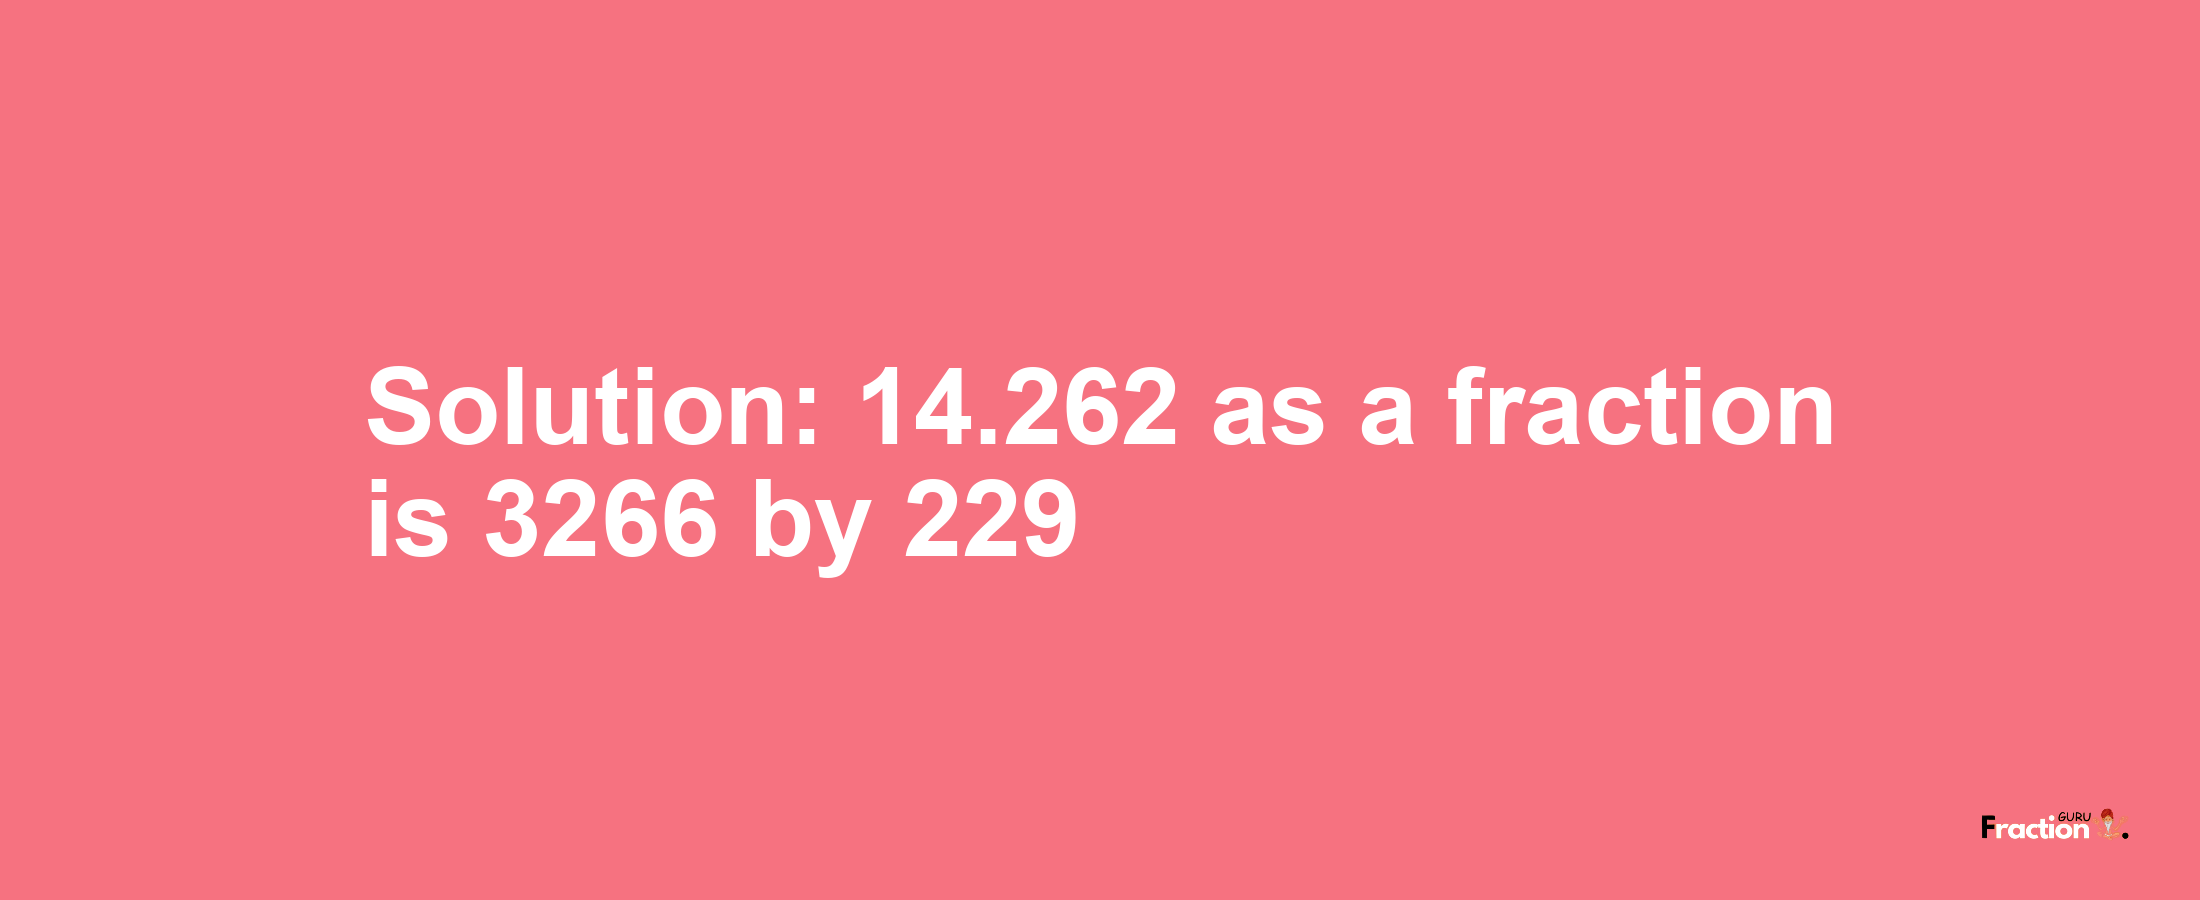 Solution:14.262 as a fraction is 3266/229